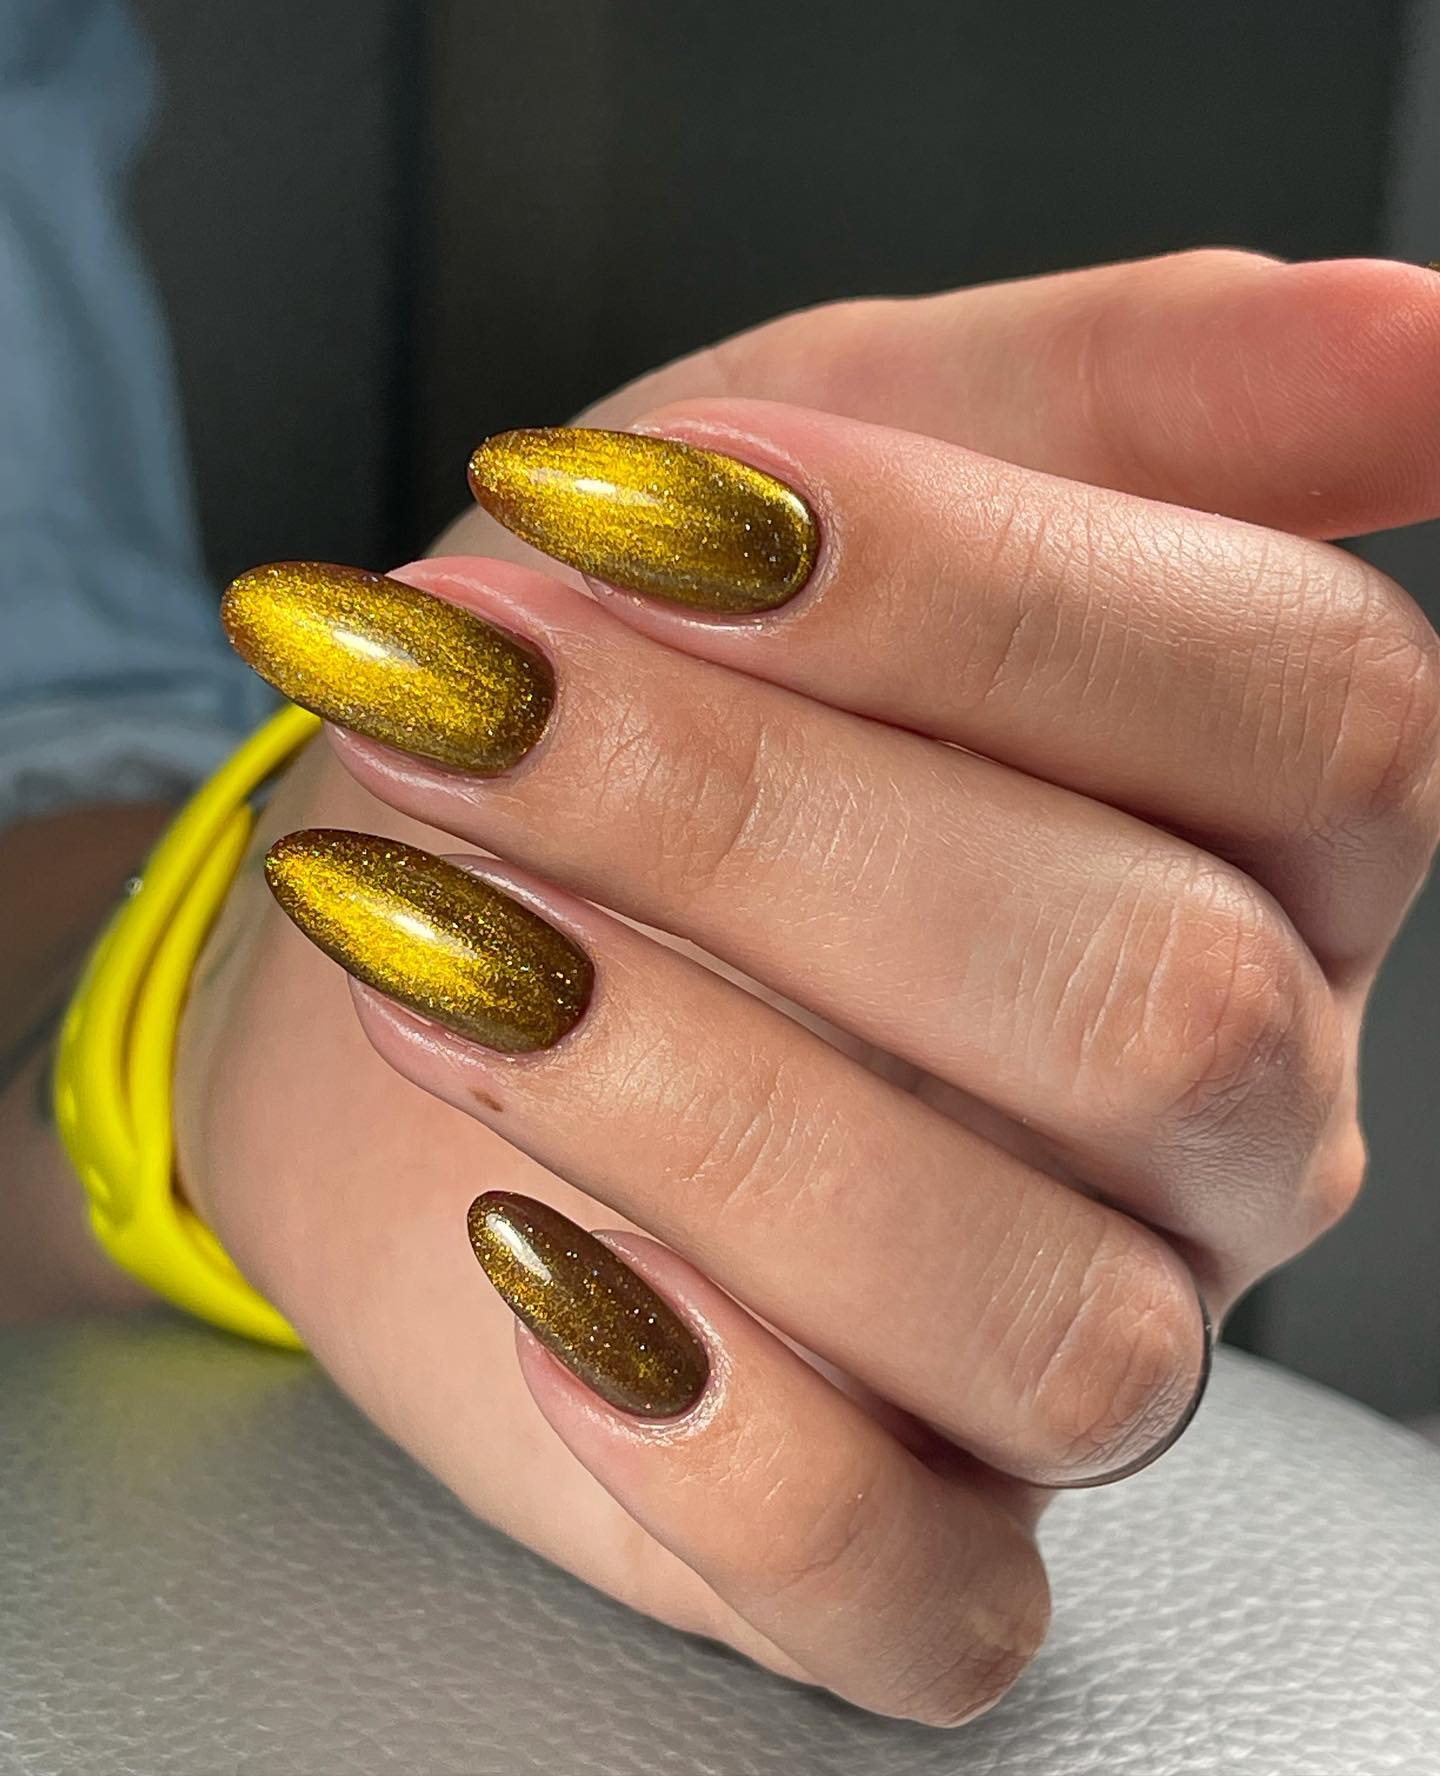 Dark yellow cat eye nails are here for you to rock your nails. These nails can be chosen for fall vibes, too. Let's have fun with your yellow nails.